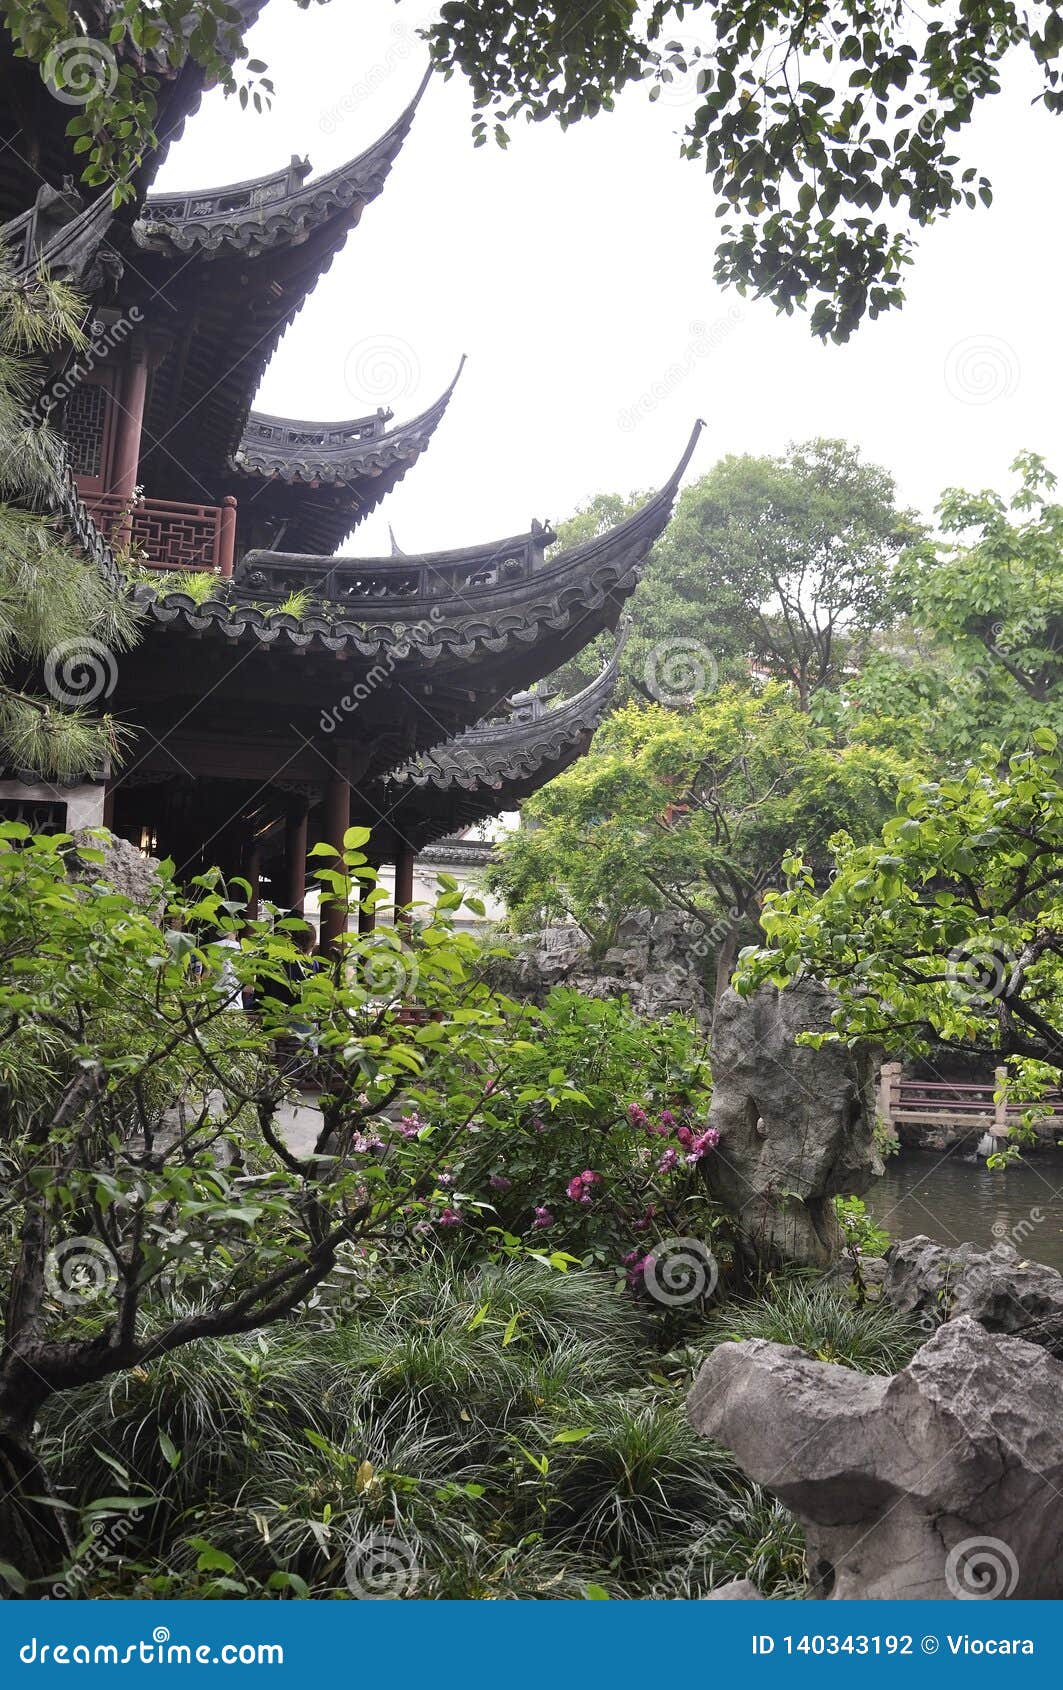 Shanghai 2nd May Picturesque Landscape From The Famous Yu Garden